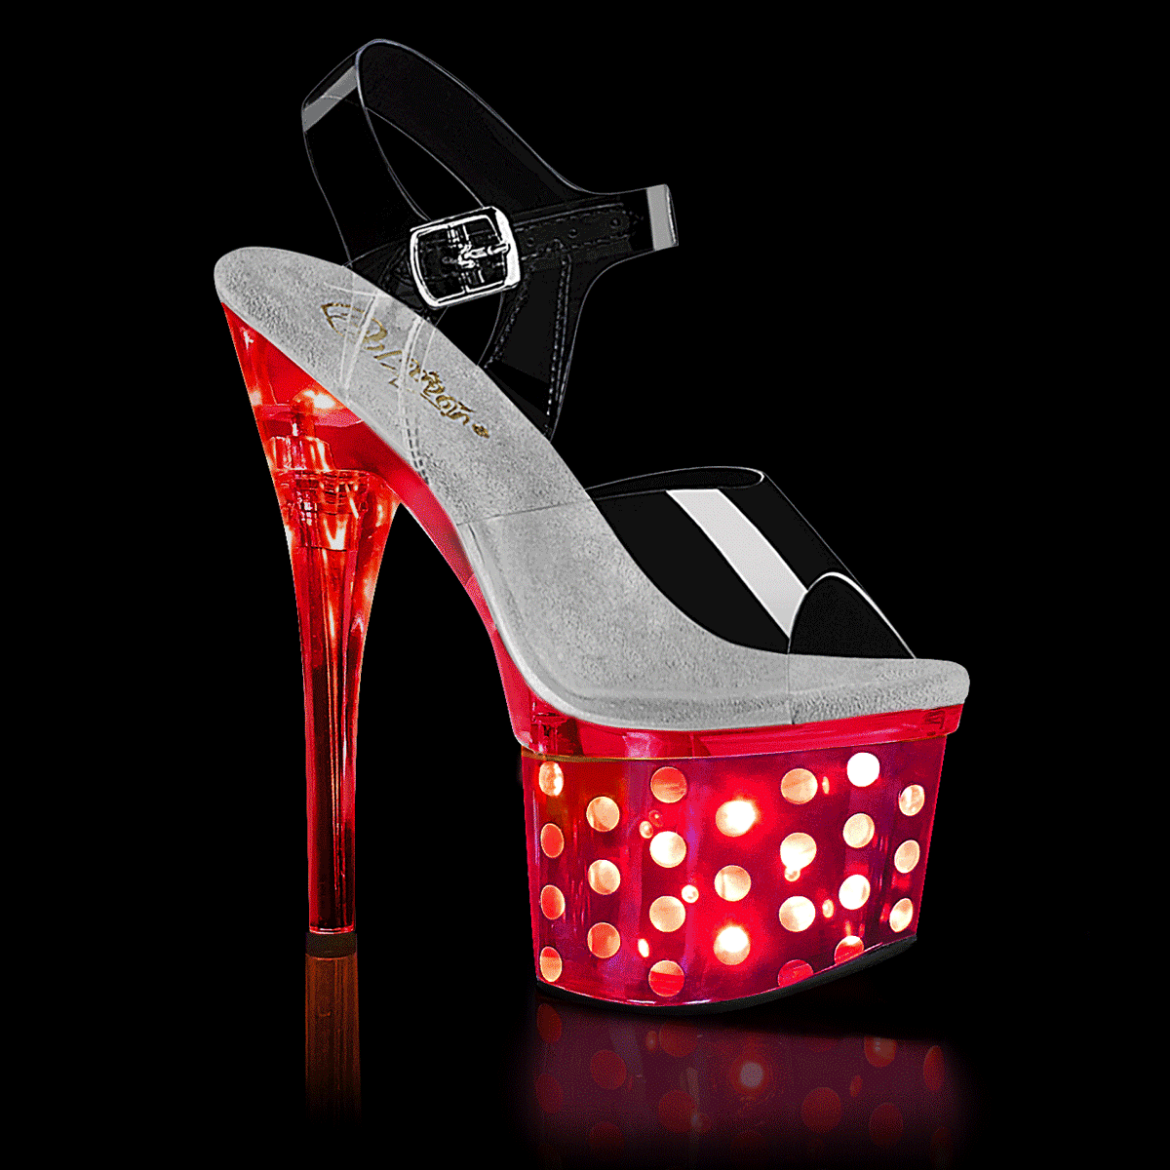 Product image of Pleaser DISCOLITE-708DOTS Clear/Silver Chrome 7 inch (17.8 cm) Heel 3 inch (7.6 cm) Platform Led Illuminated Ankle Strap Sandal